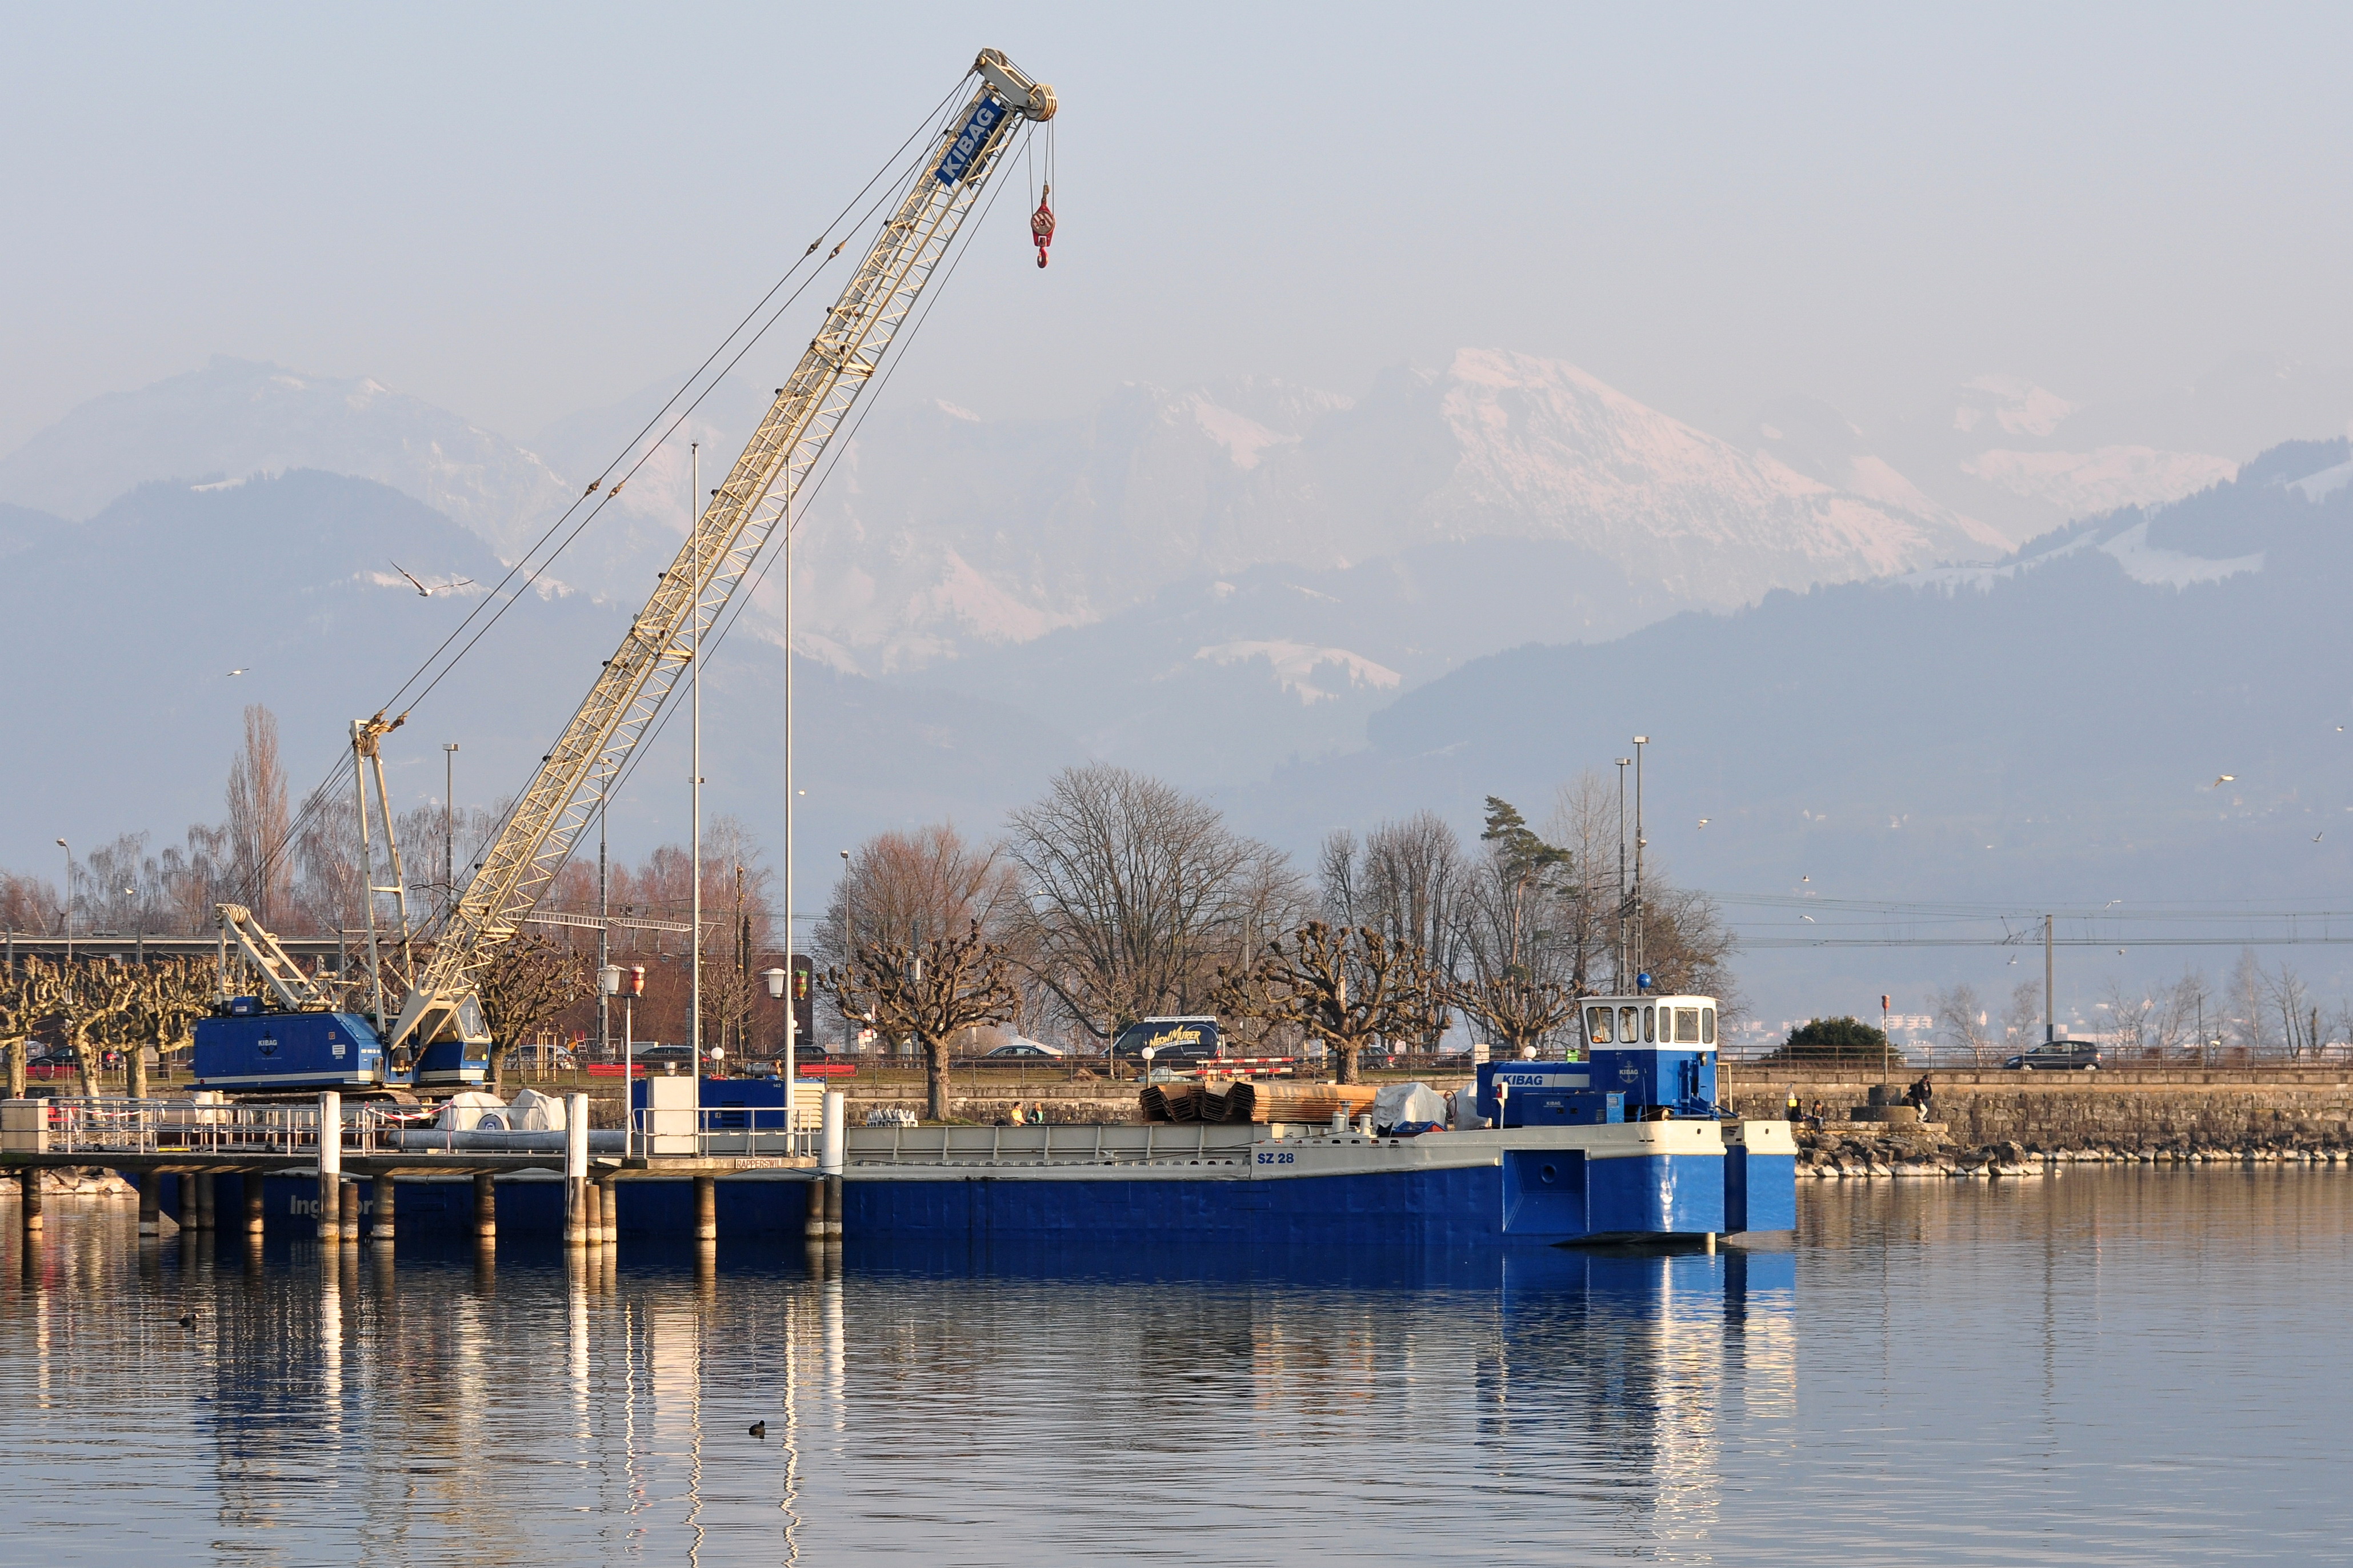 Rapperswil - Hafen 2011-03-08 17-08-04 ShiftN